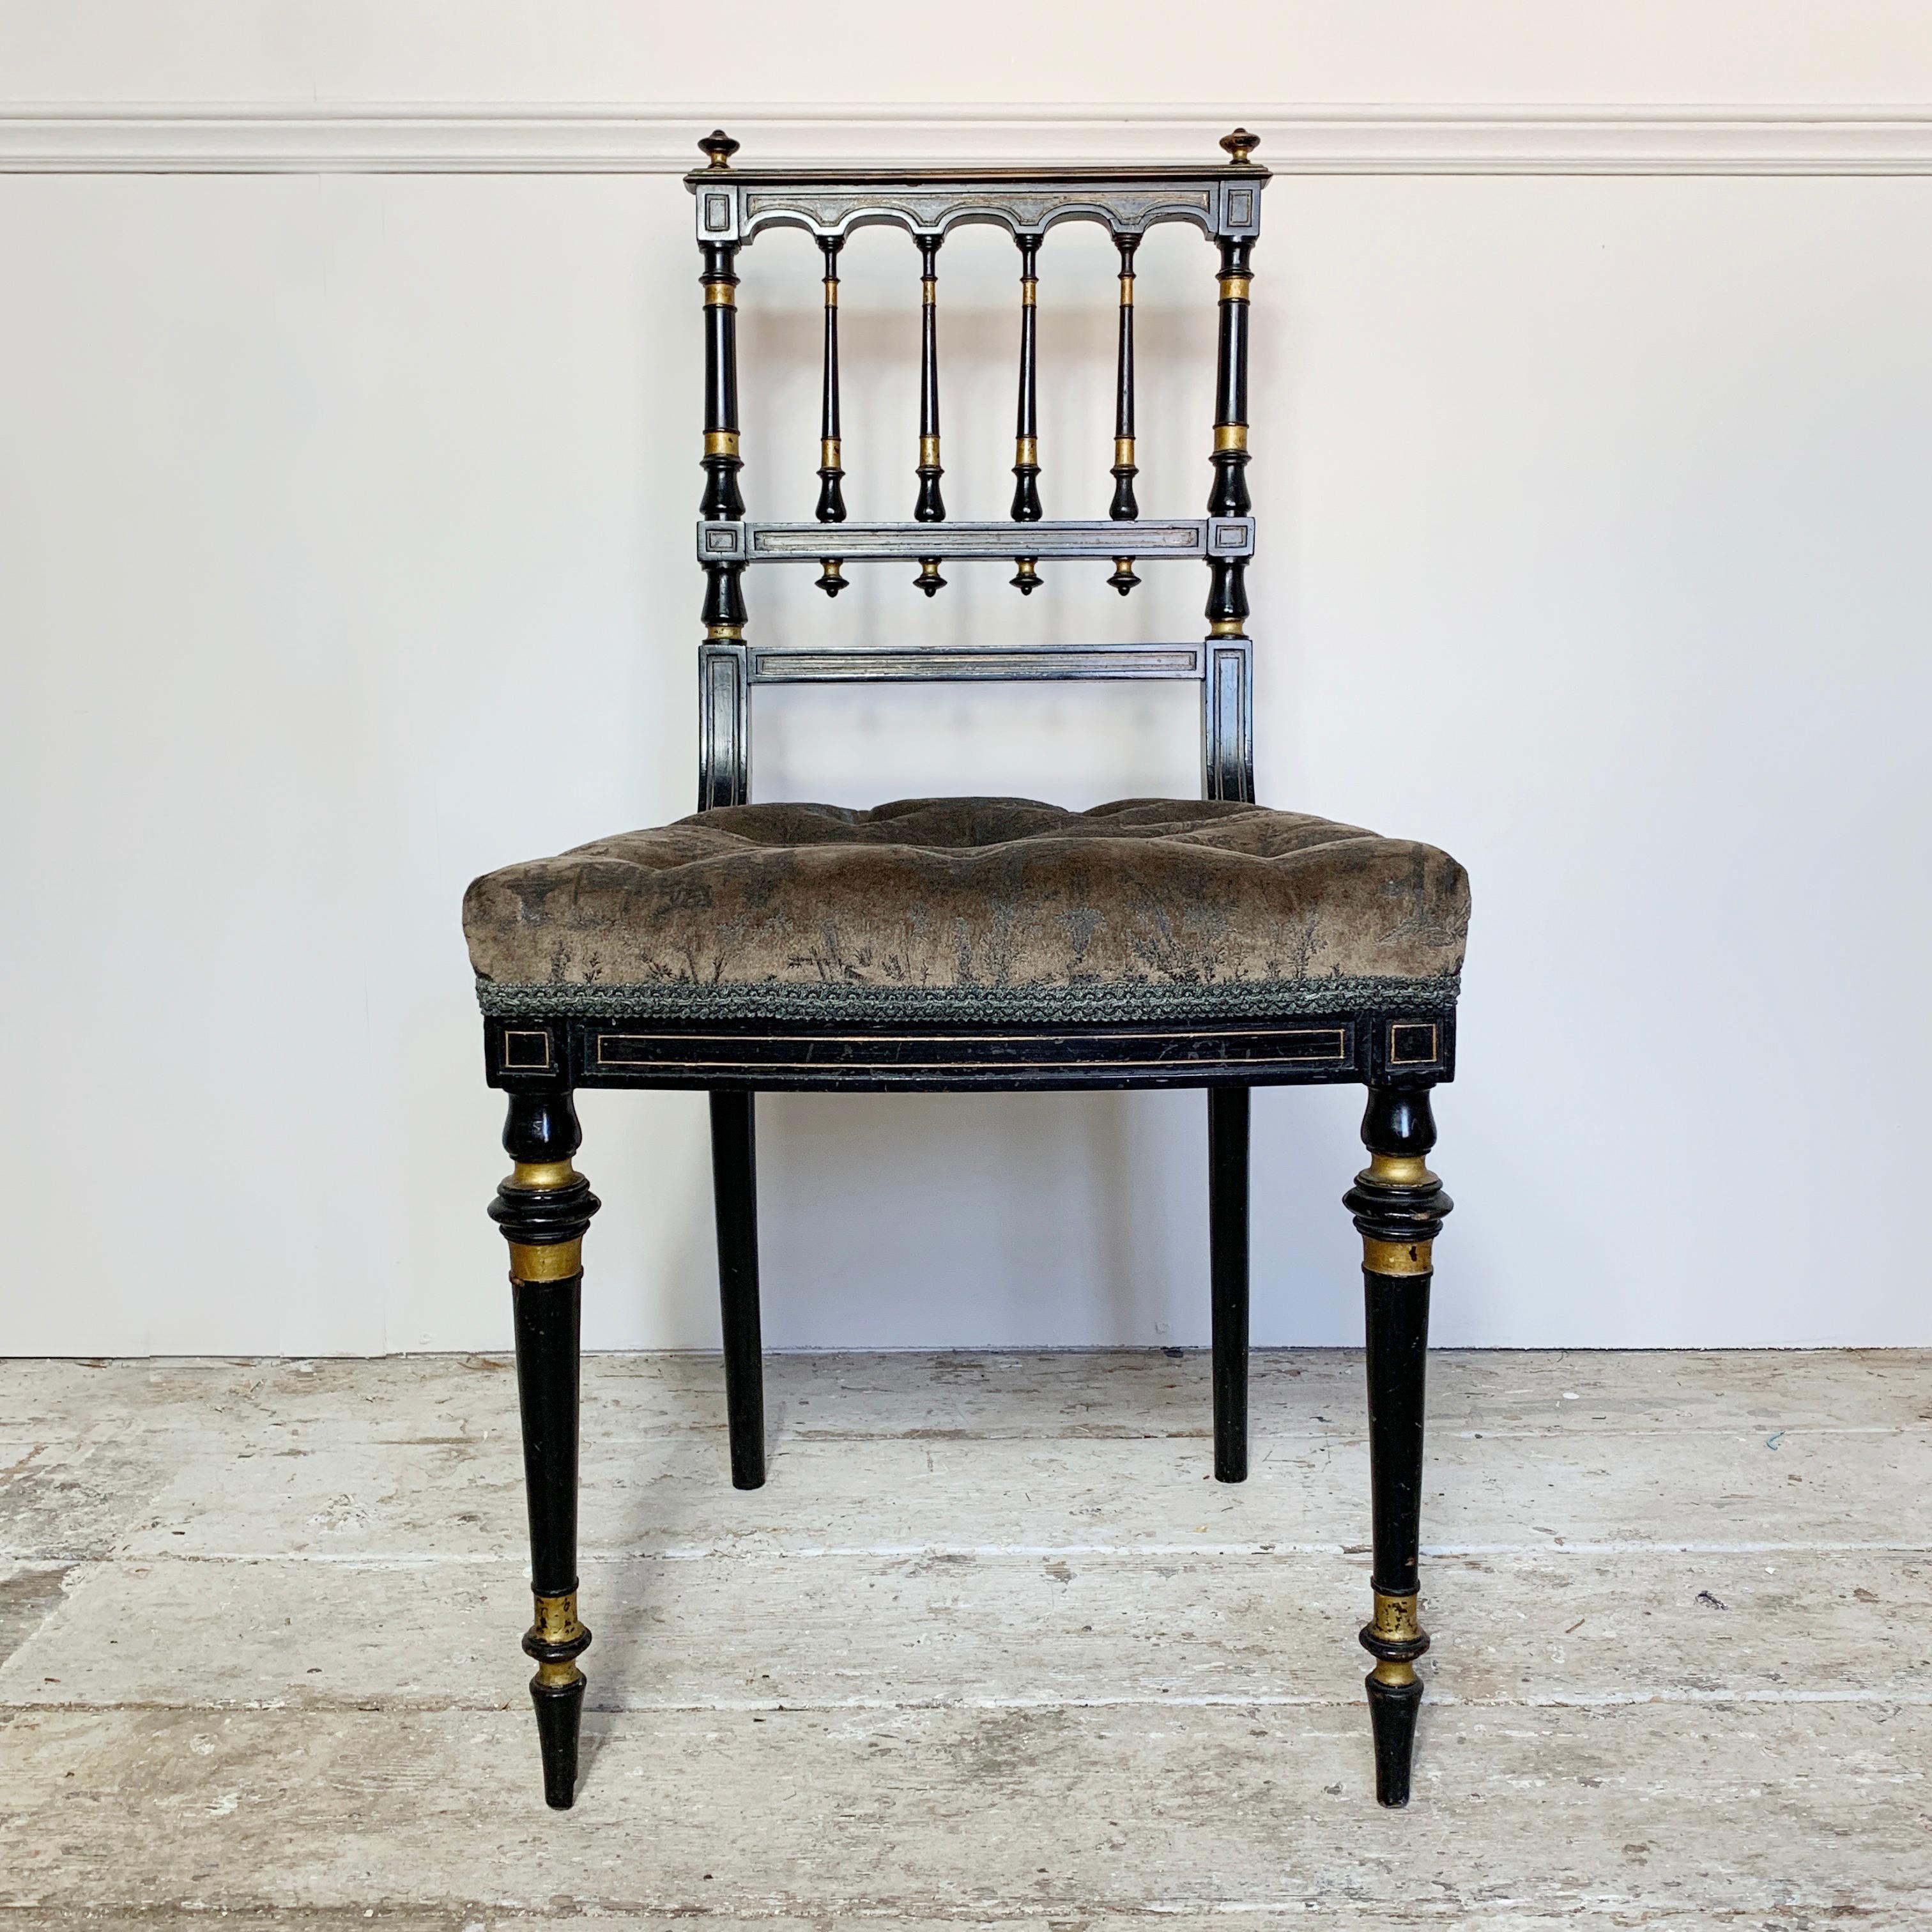 Antique Victorian aesthetic movement side chair
Ebonized with gilt detailing
Spindle back with finial decoration,
circa 1860-1875
The seat is deep buttoned in an oriental scene fabric, previously re-upholstered
Excellent structural condition